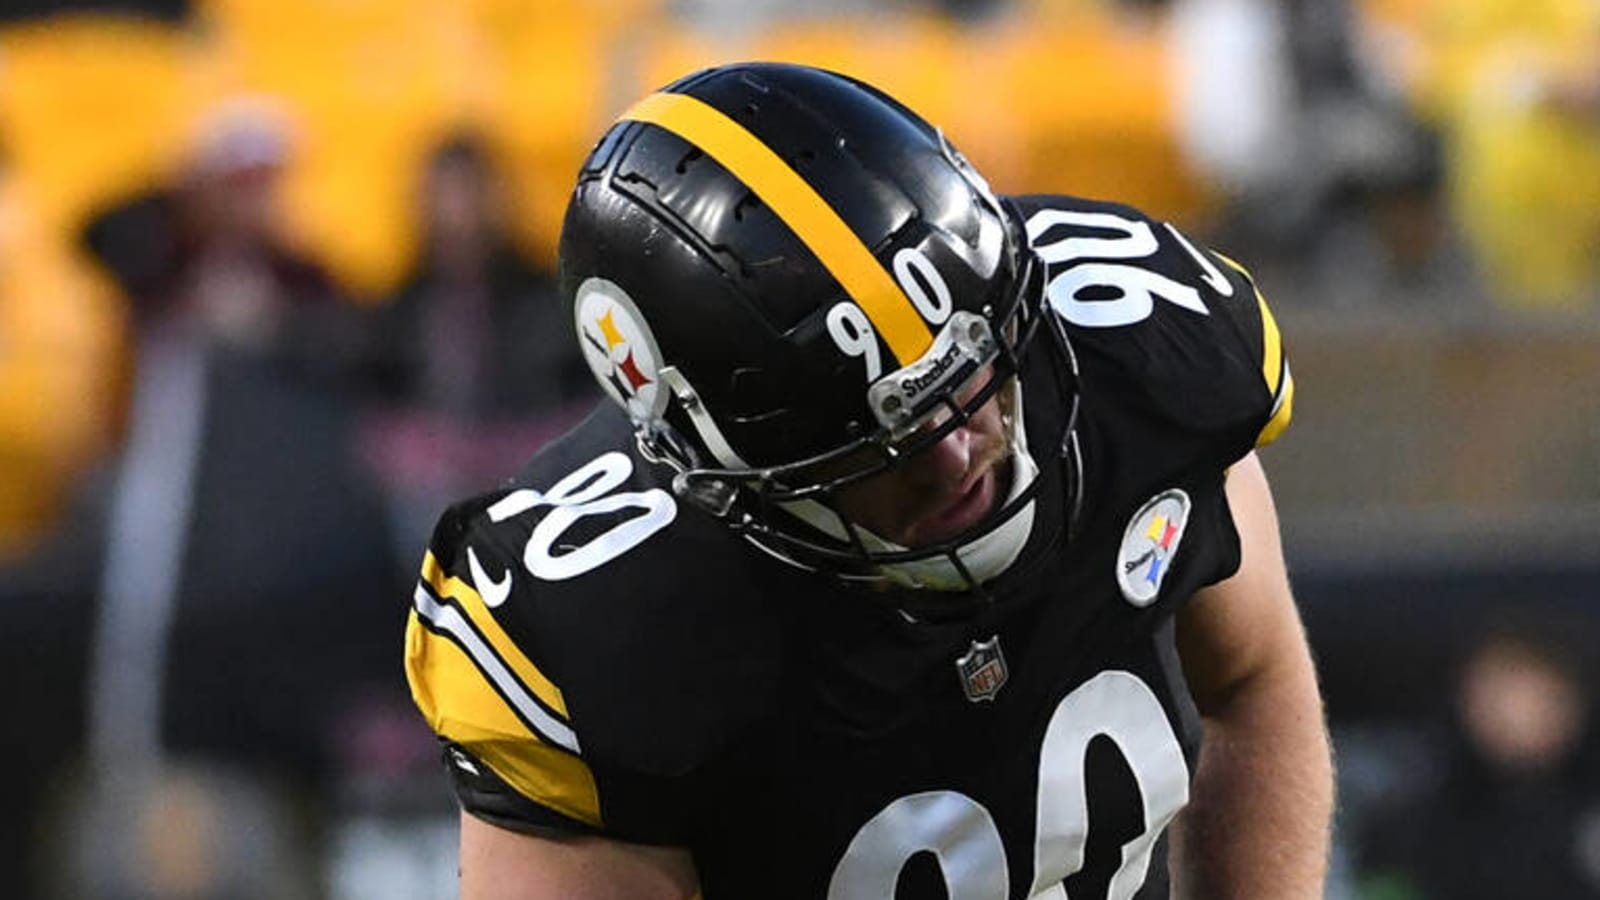 Steelers' Watt blasts officials over injury suffered in loss